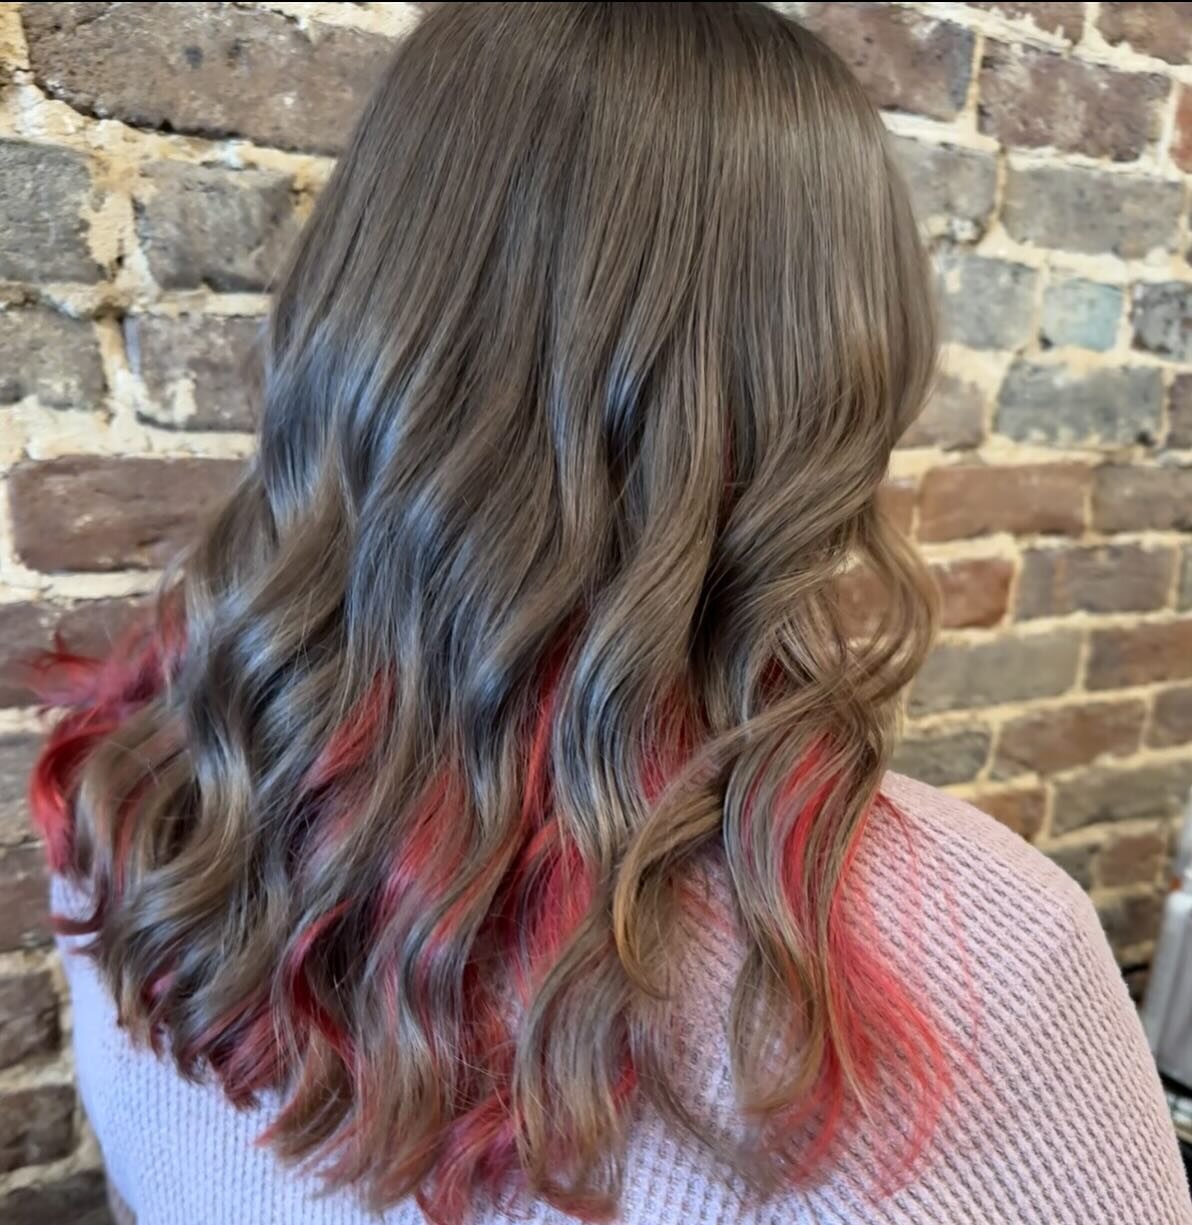 🍭🍎🔥 
We are seeing peek-a-boo + block colors happening ALOT in the salon lately! 

🌶️🥵🤎This candy apple selection was a great way to Spice UPPPPP her natural brown tones with a fun pop of color without the full color commitment, and she&rsquo;l